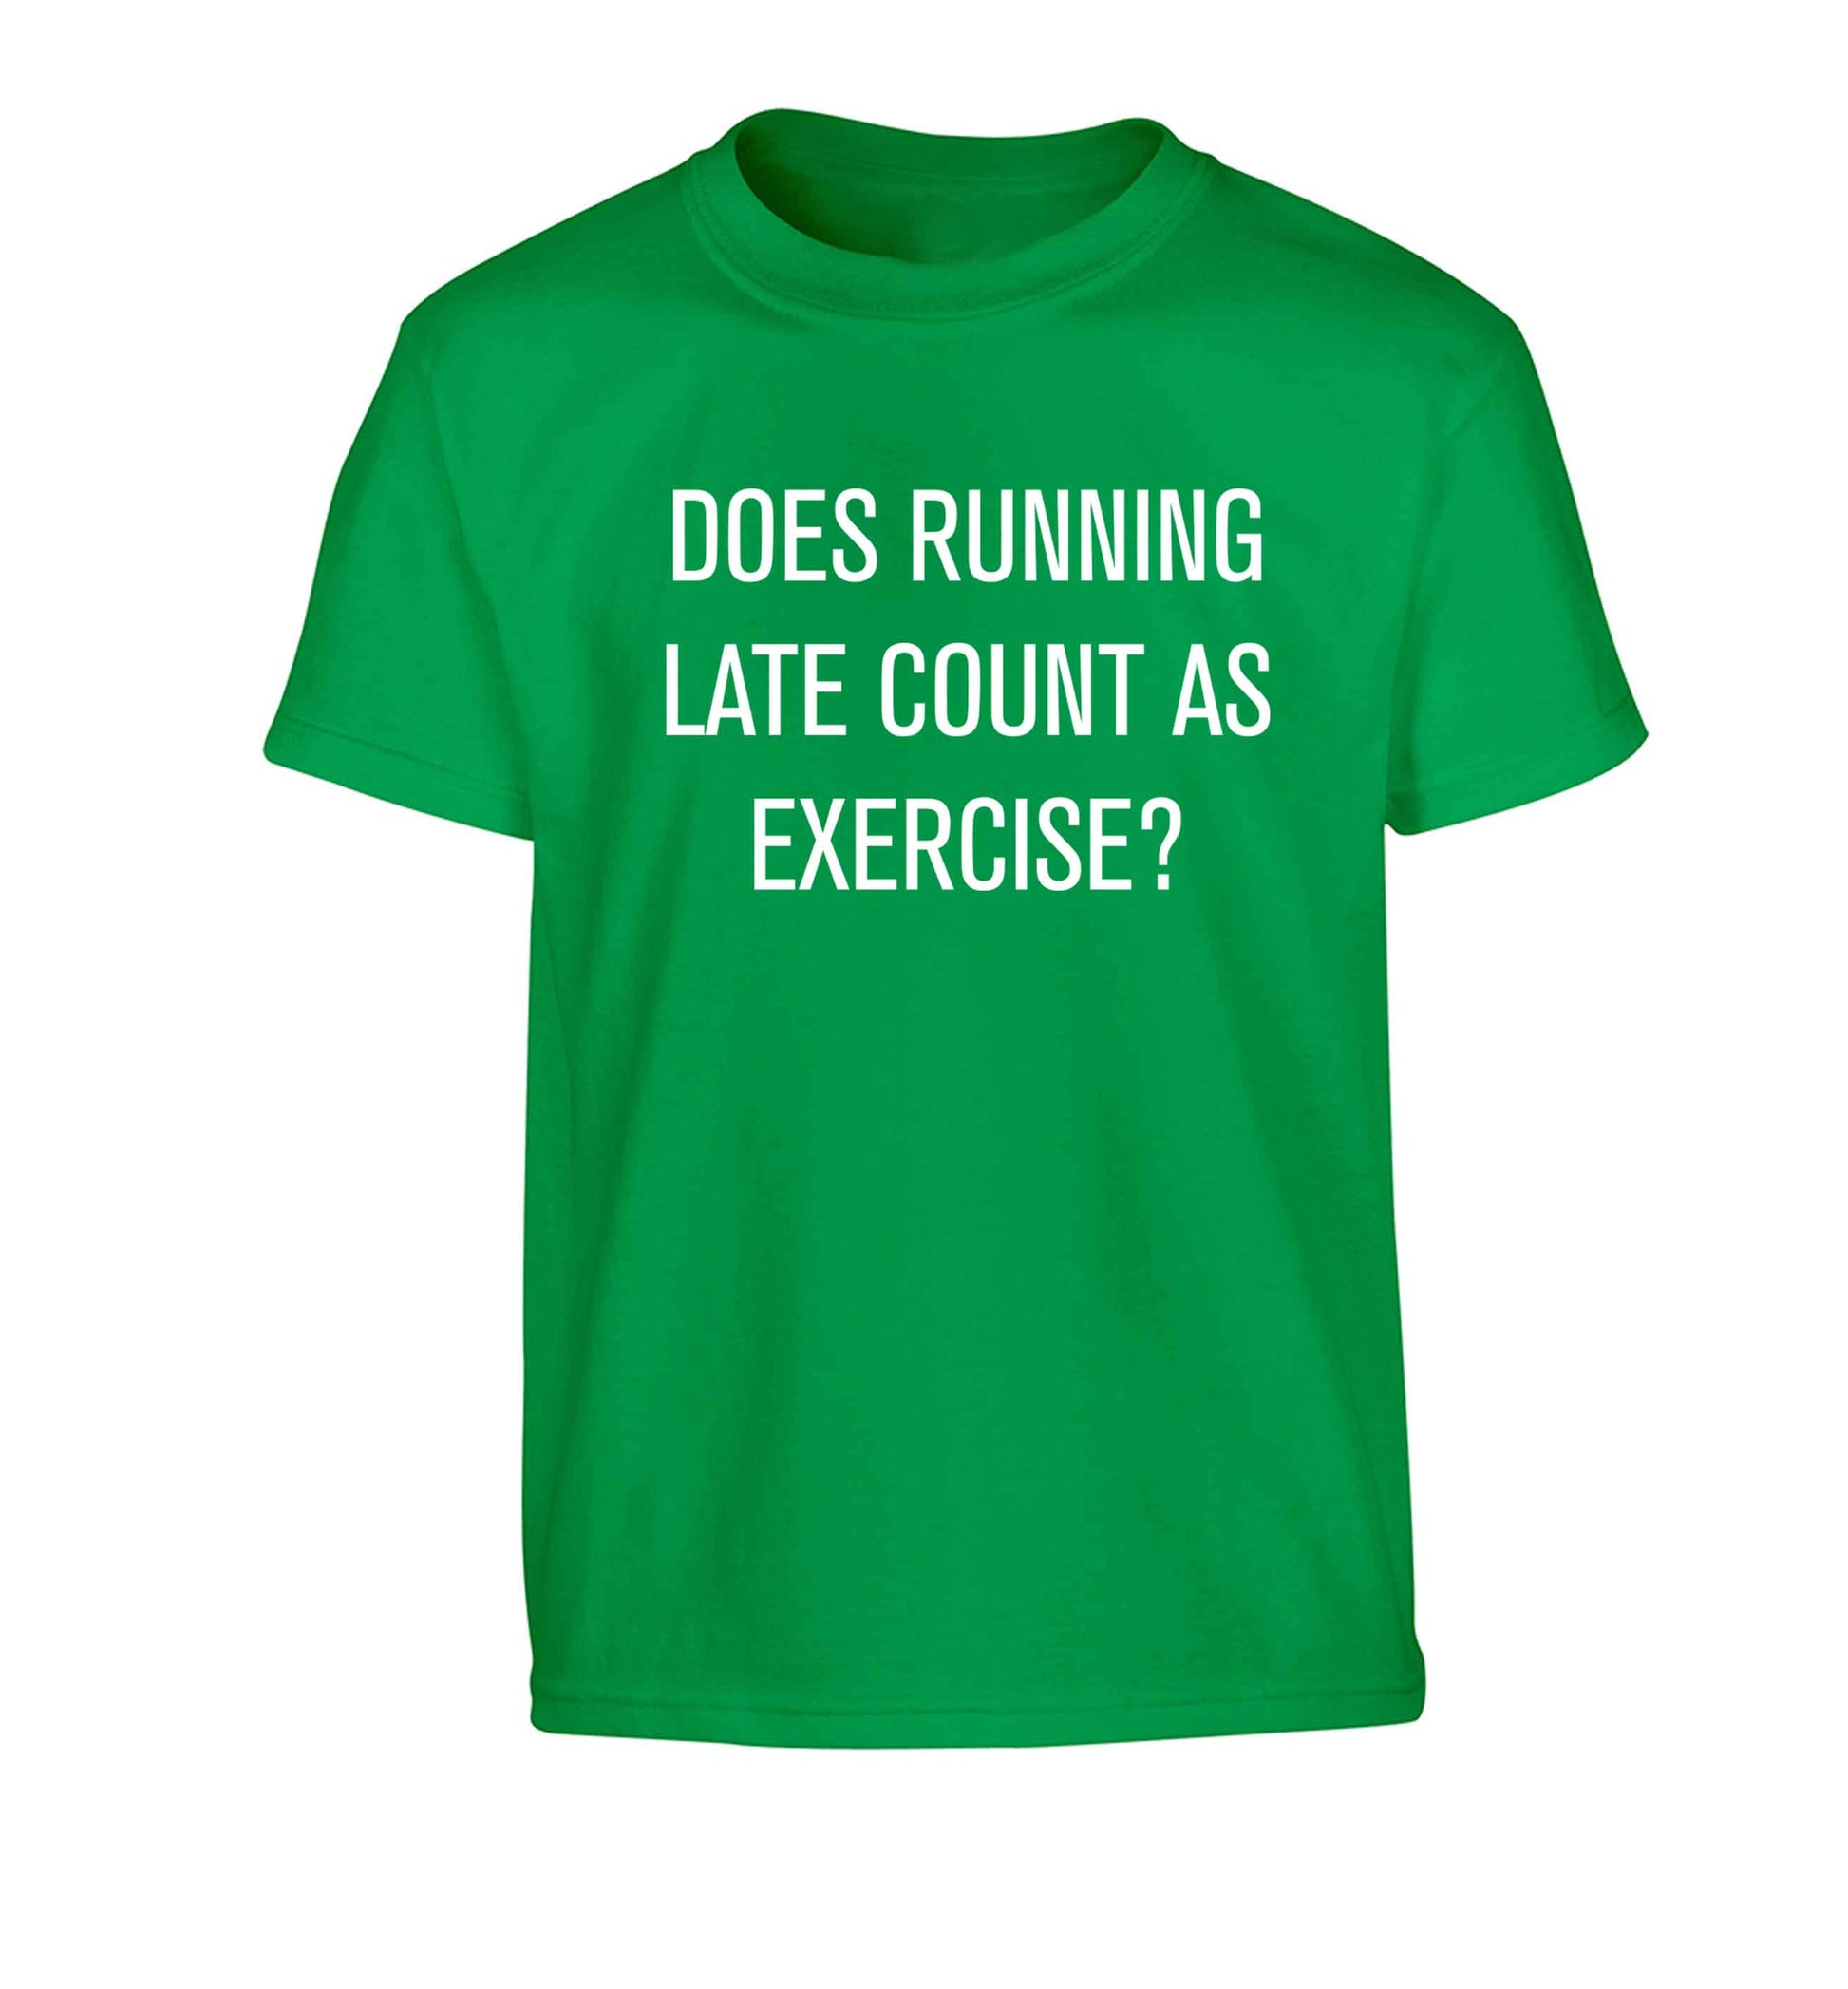 Does running late count as exercise? Children's green Tshirt 12-13 Years